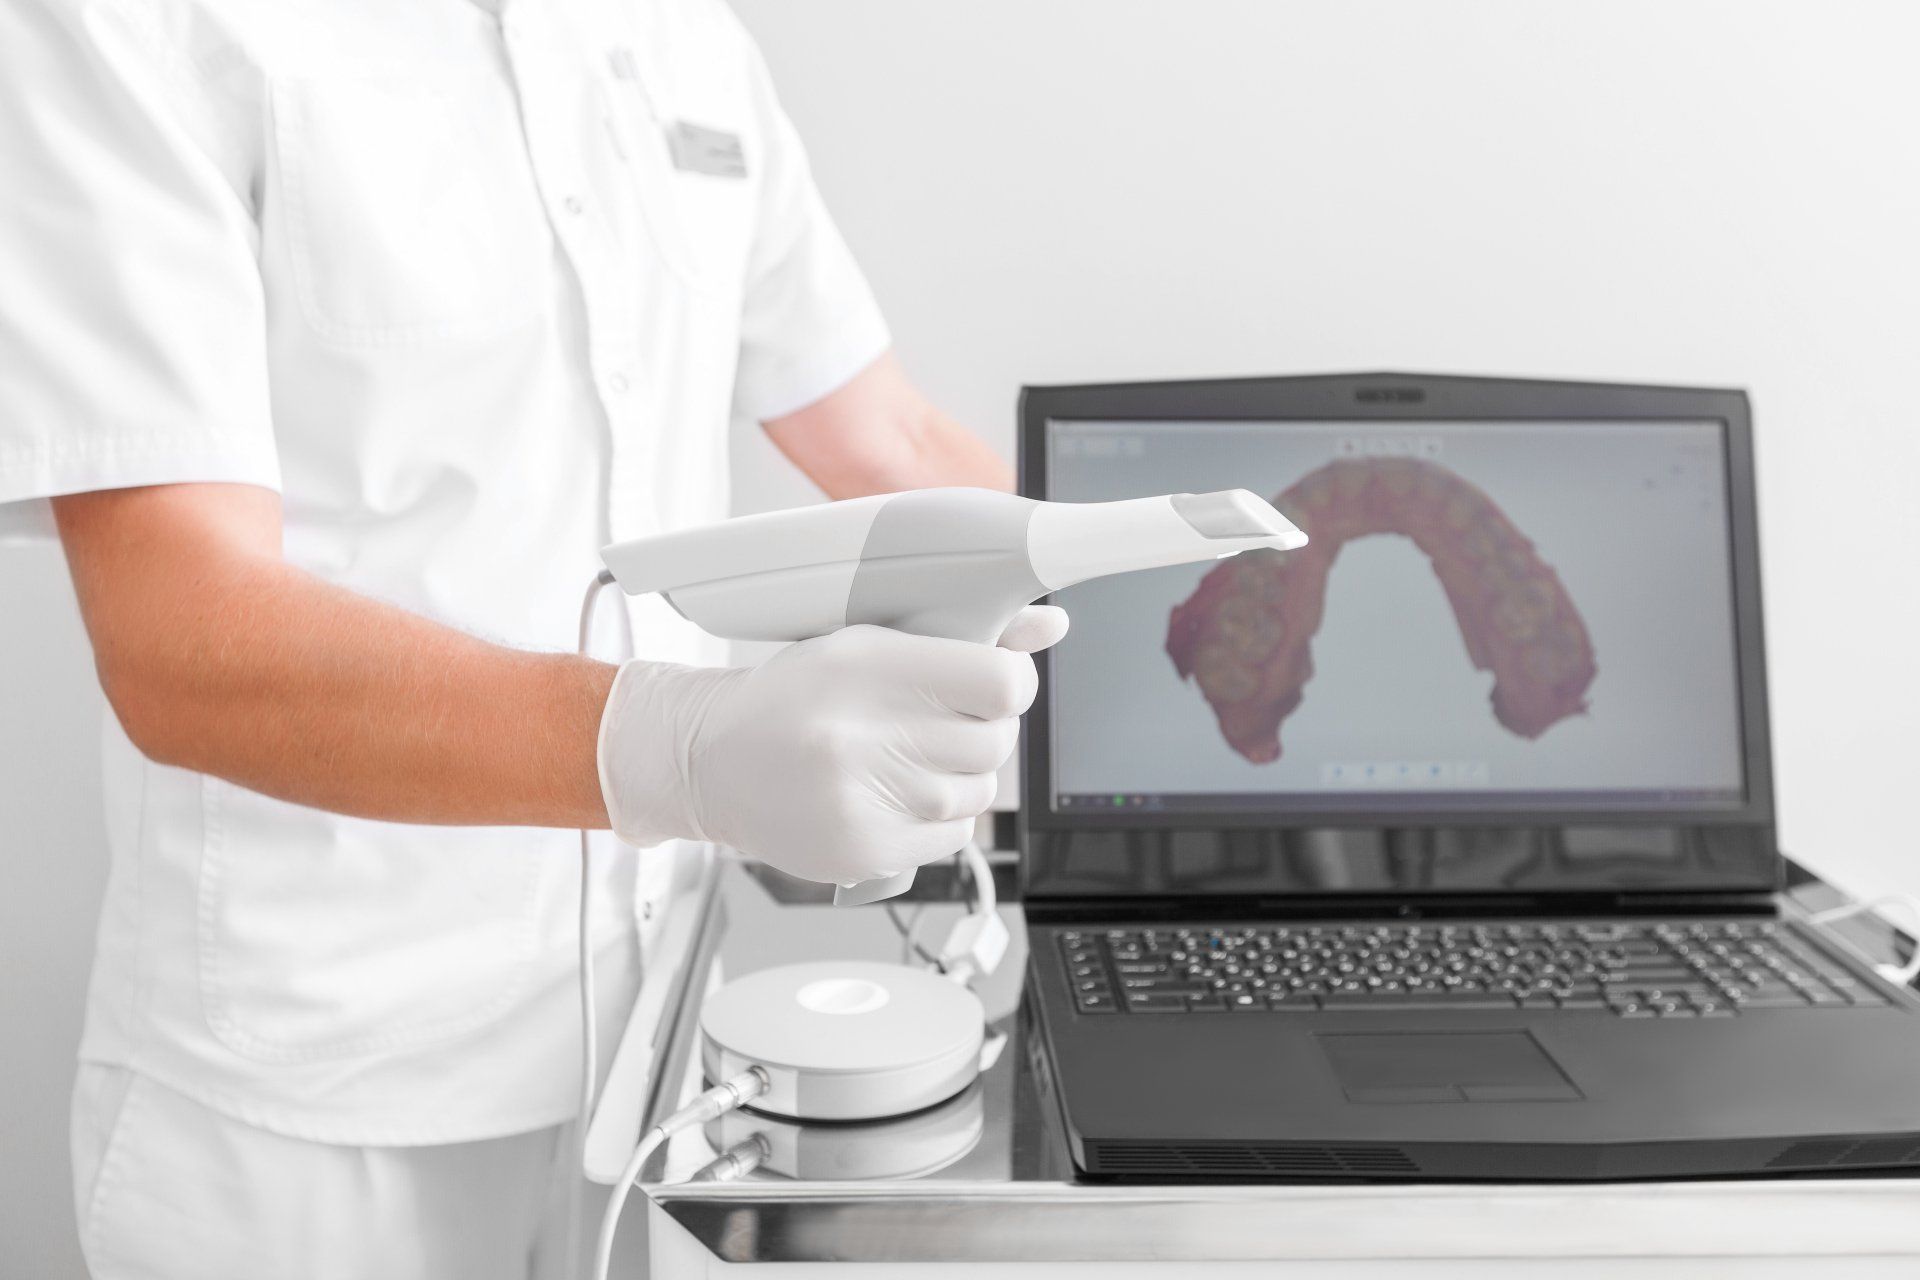 Dental technology | Dental 3D scanner | dentist near you | man holding scanner in front of a computer | Bloor Street Dental | Best Family and Cosmetic Dentist In Mississauga For Implants, Braces, and Invisalign